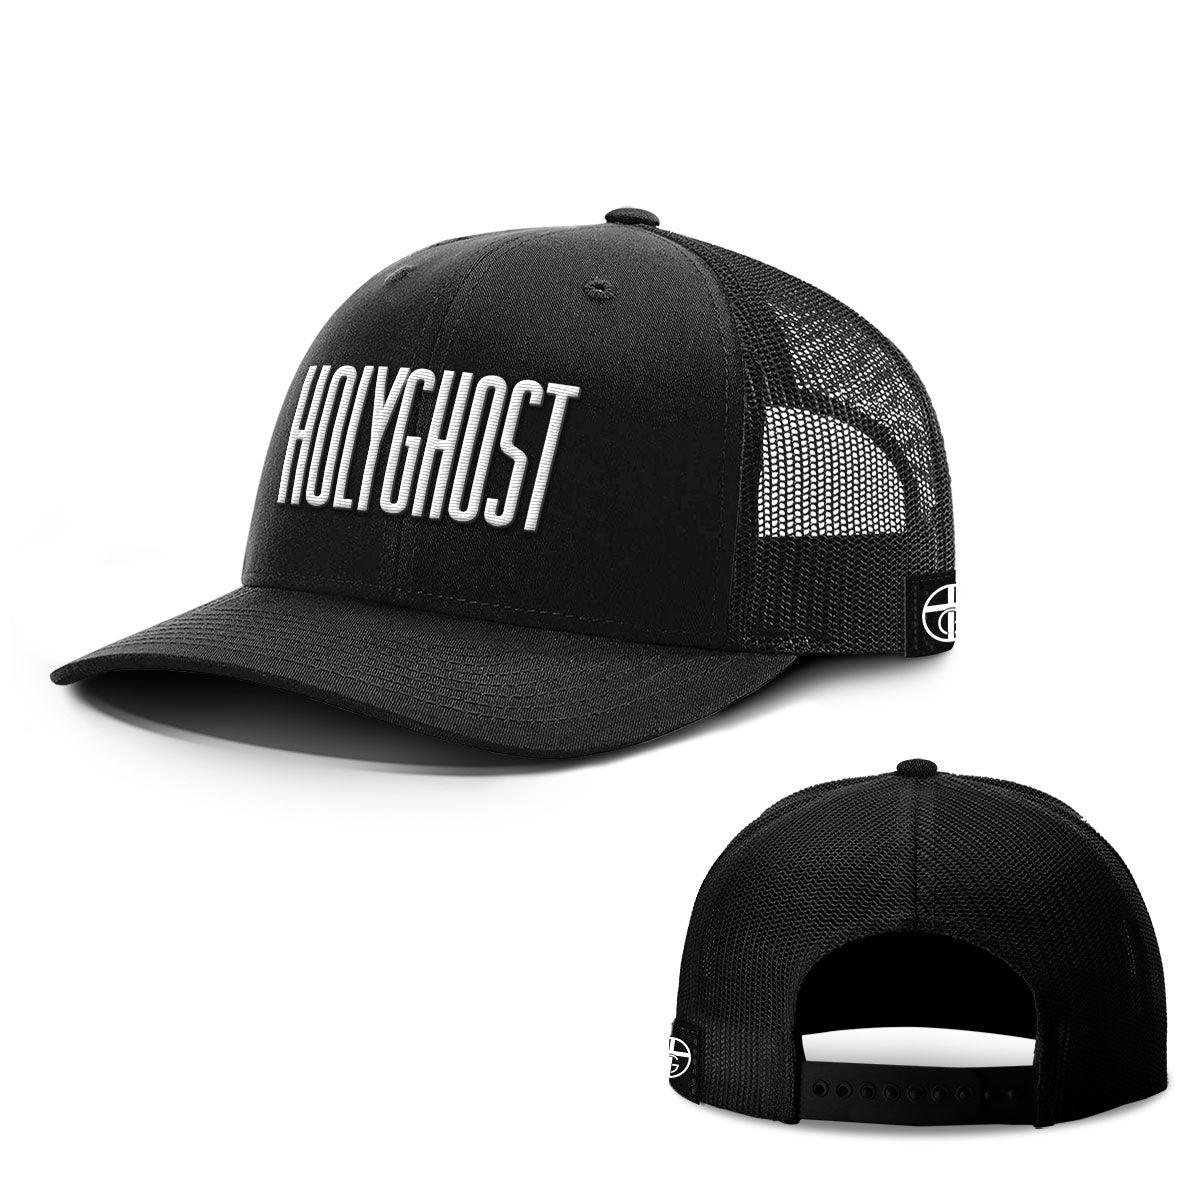 Holy Ghost Hats